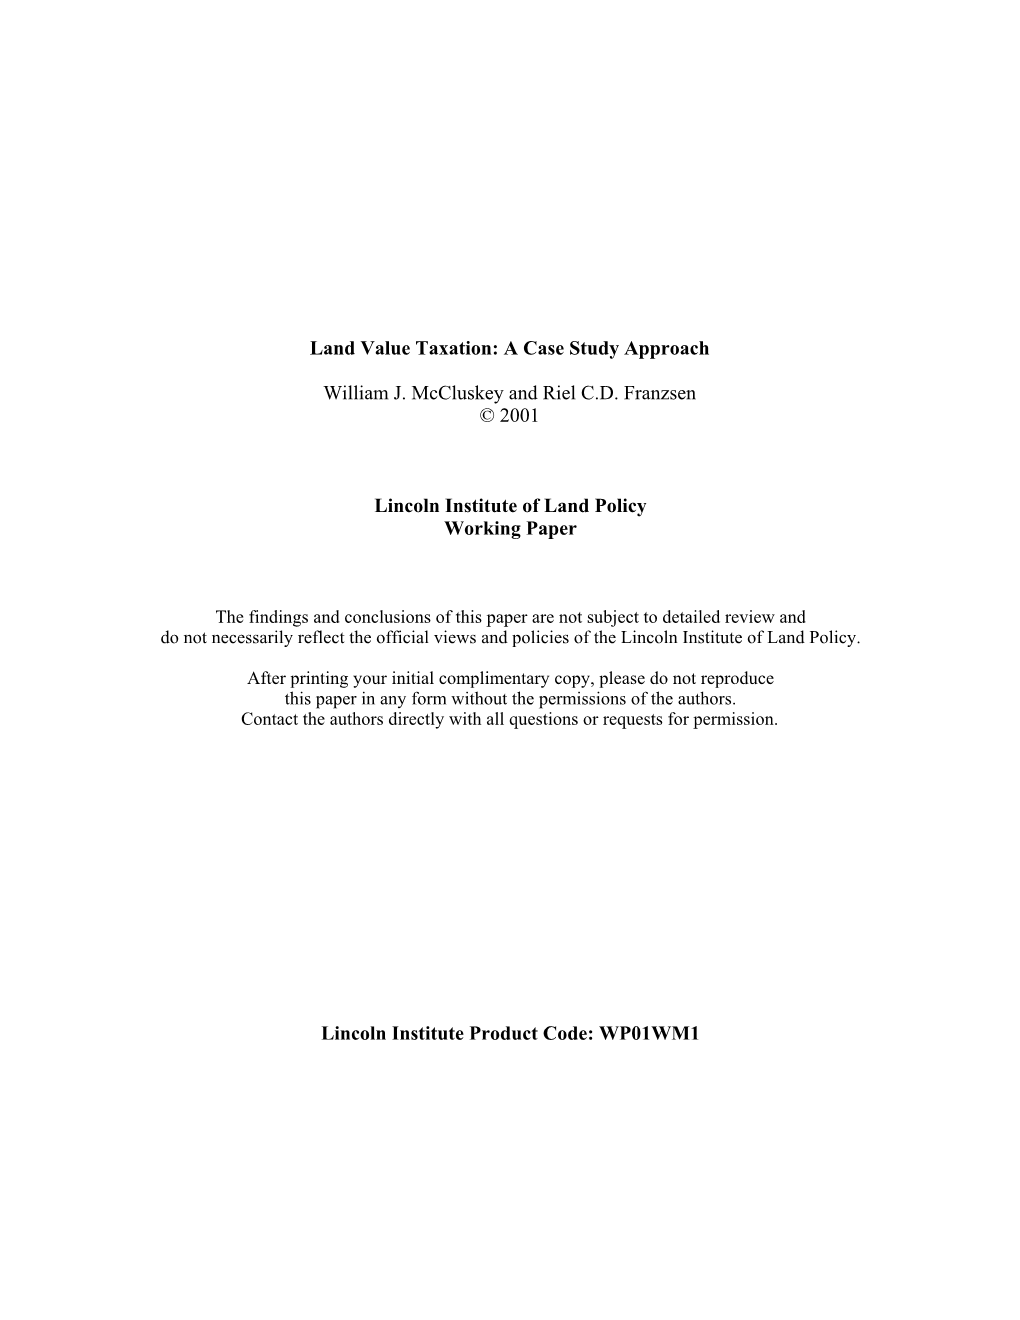 Land Value Taxation: a Case Study Approach William J. Mccluskey And